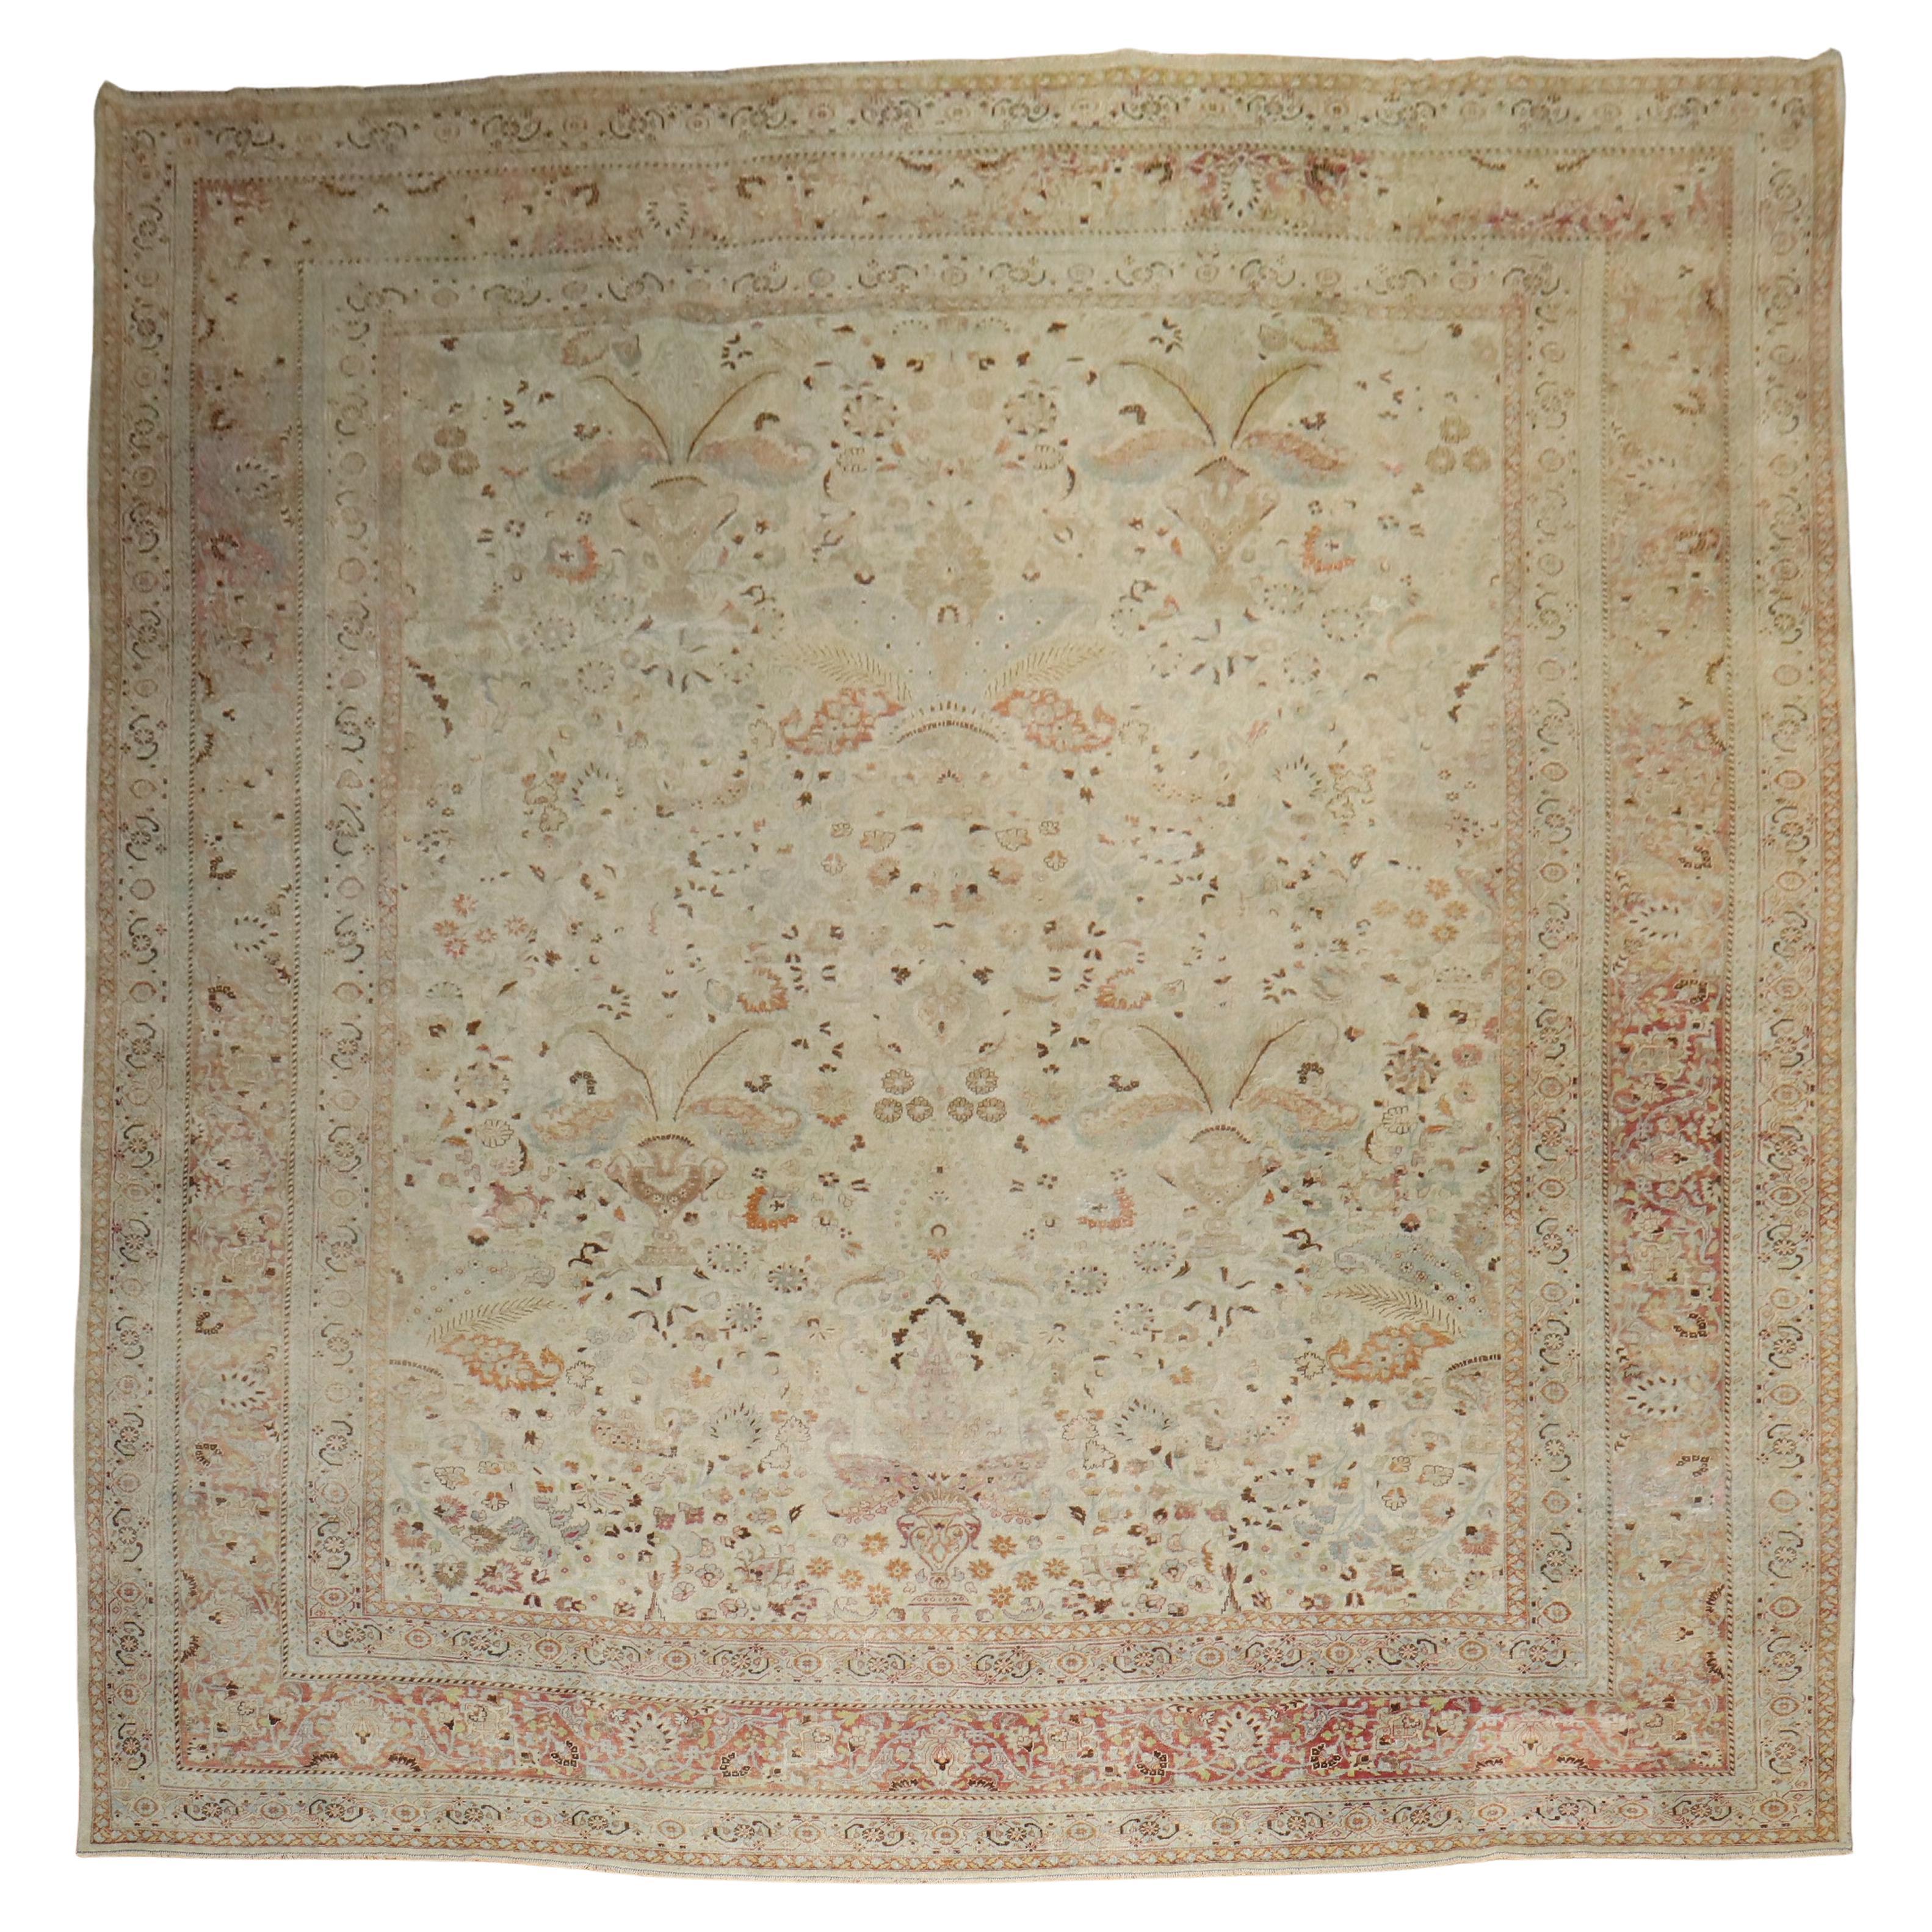 Zabihi Collection Antique Large Square Meshed Rug For Sale